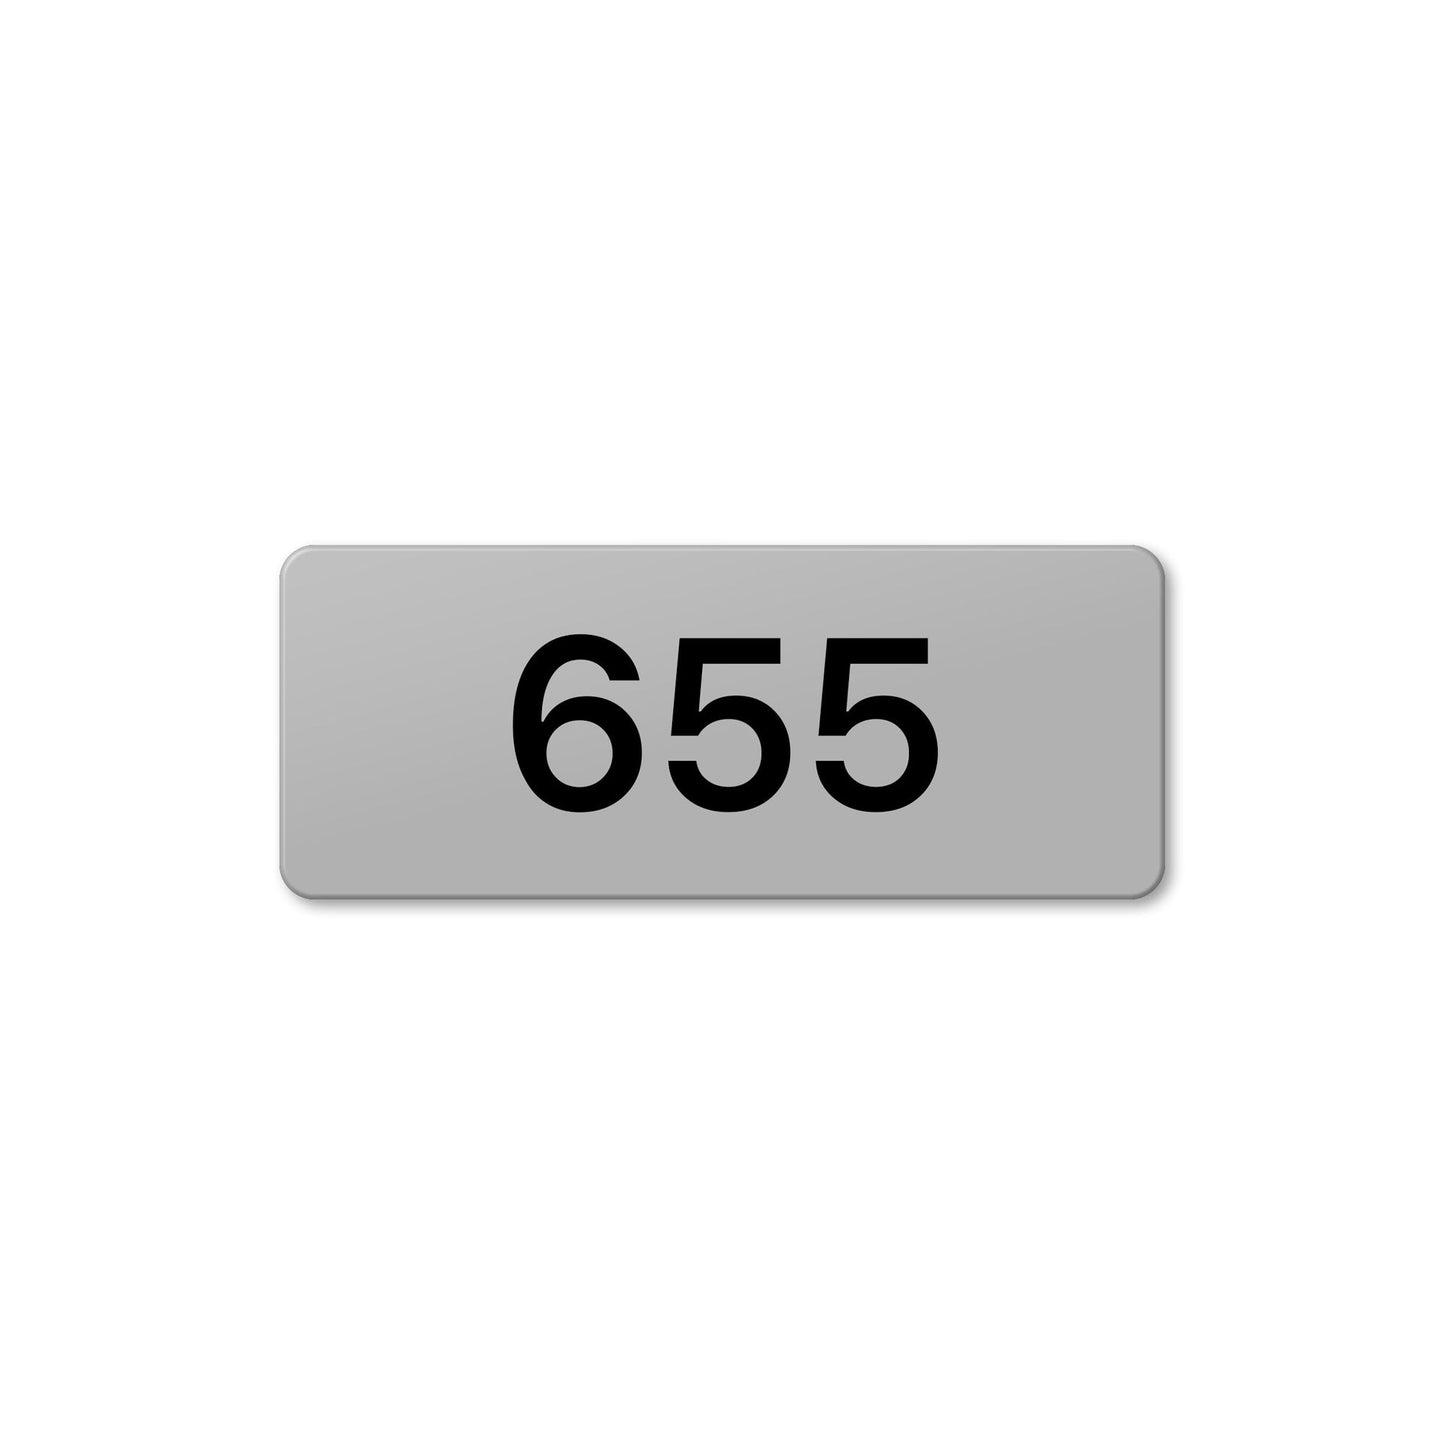 Numeral 655